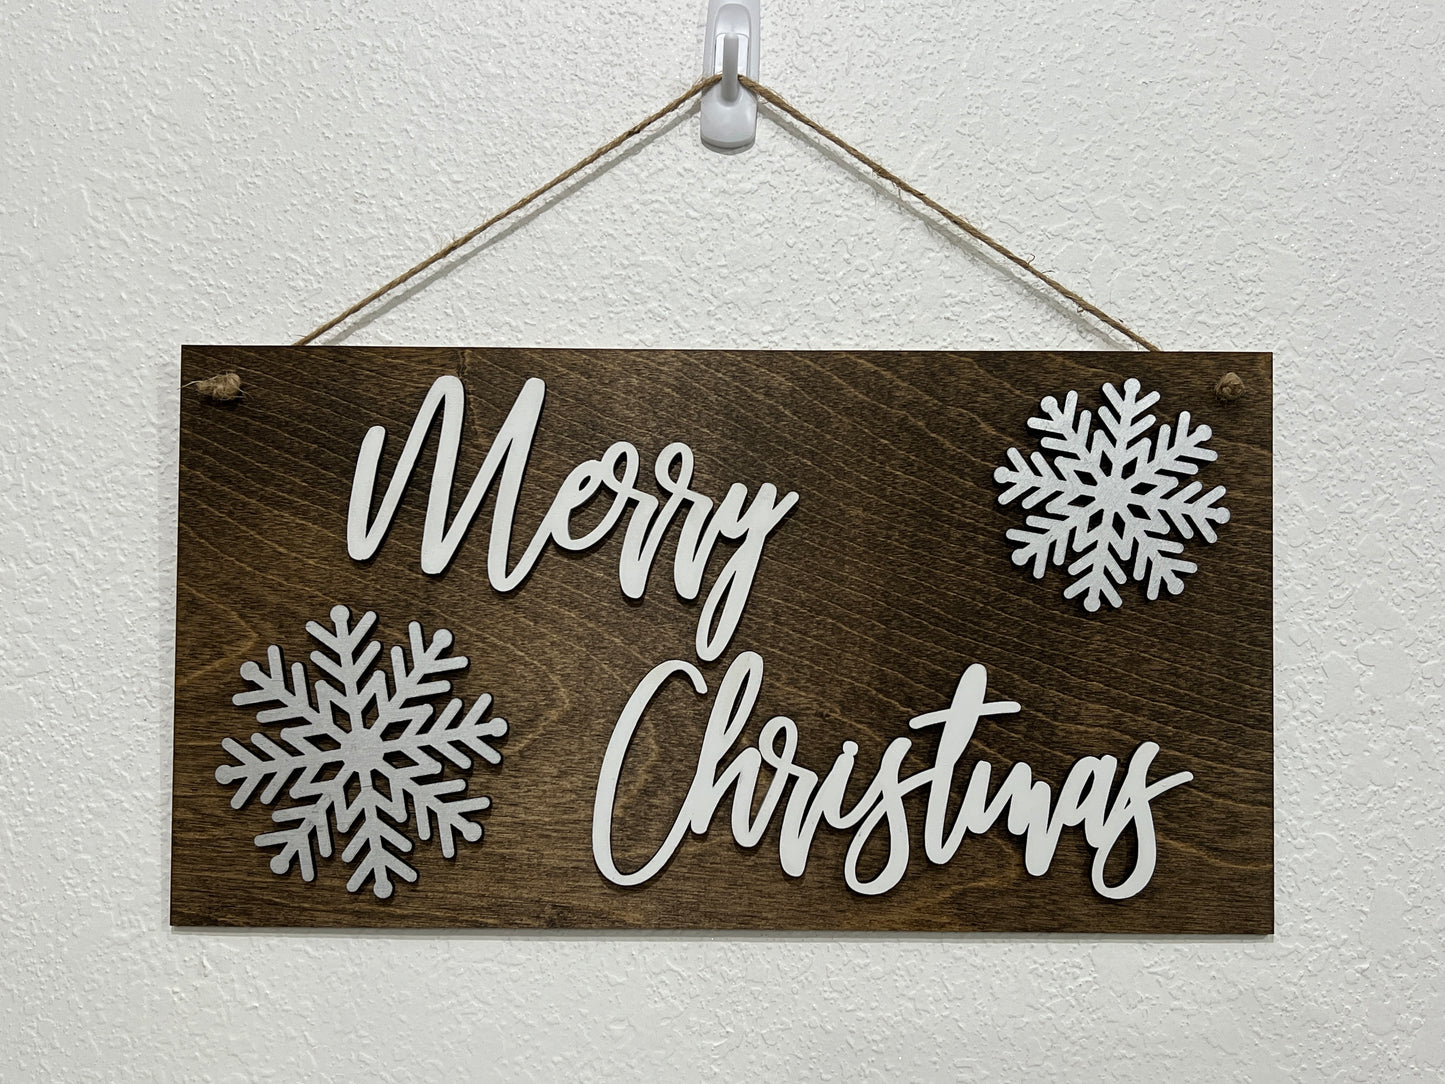 3D Merry Christmas sign - snowflake Christmas decorations - Rustic Christmas Signs - Celebrating Together